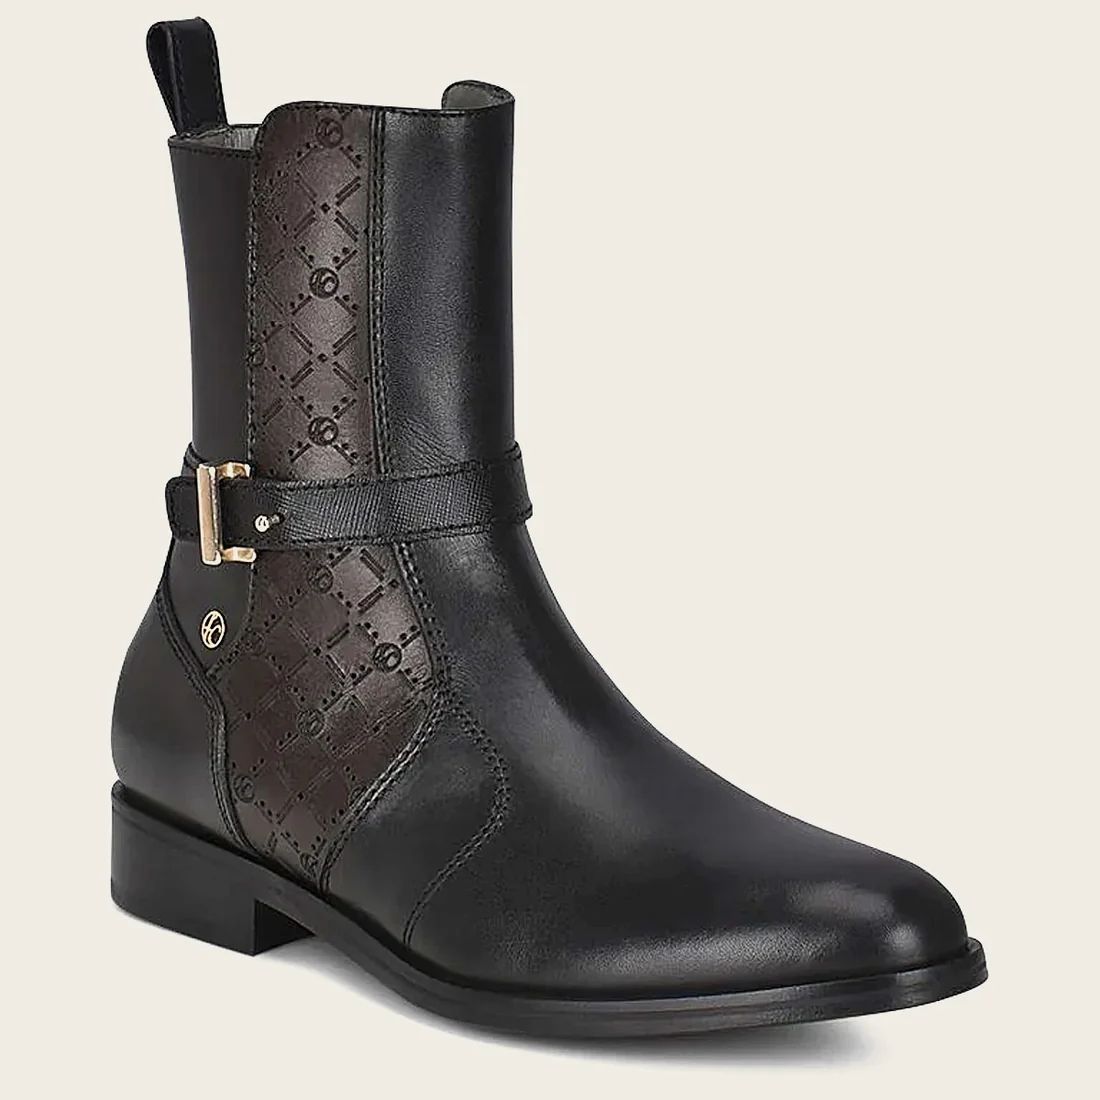 Cuadra | Hand-Painted Black Leather Engraved Bootie